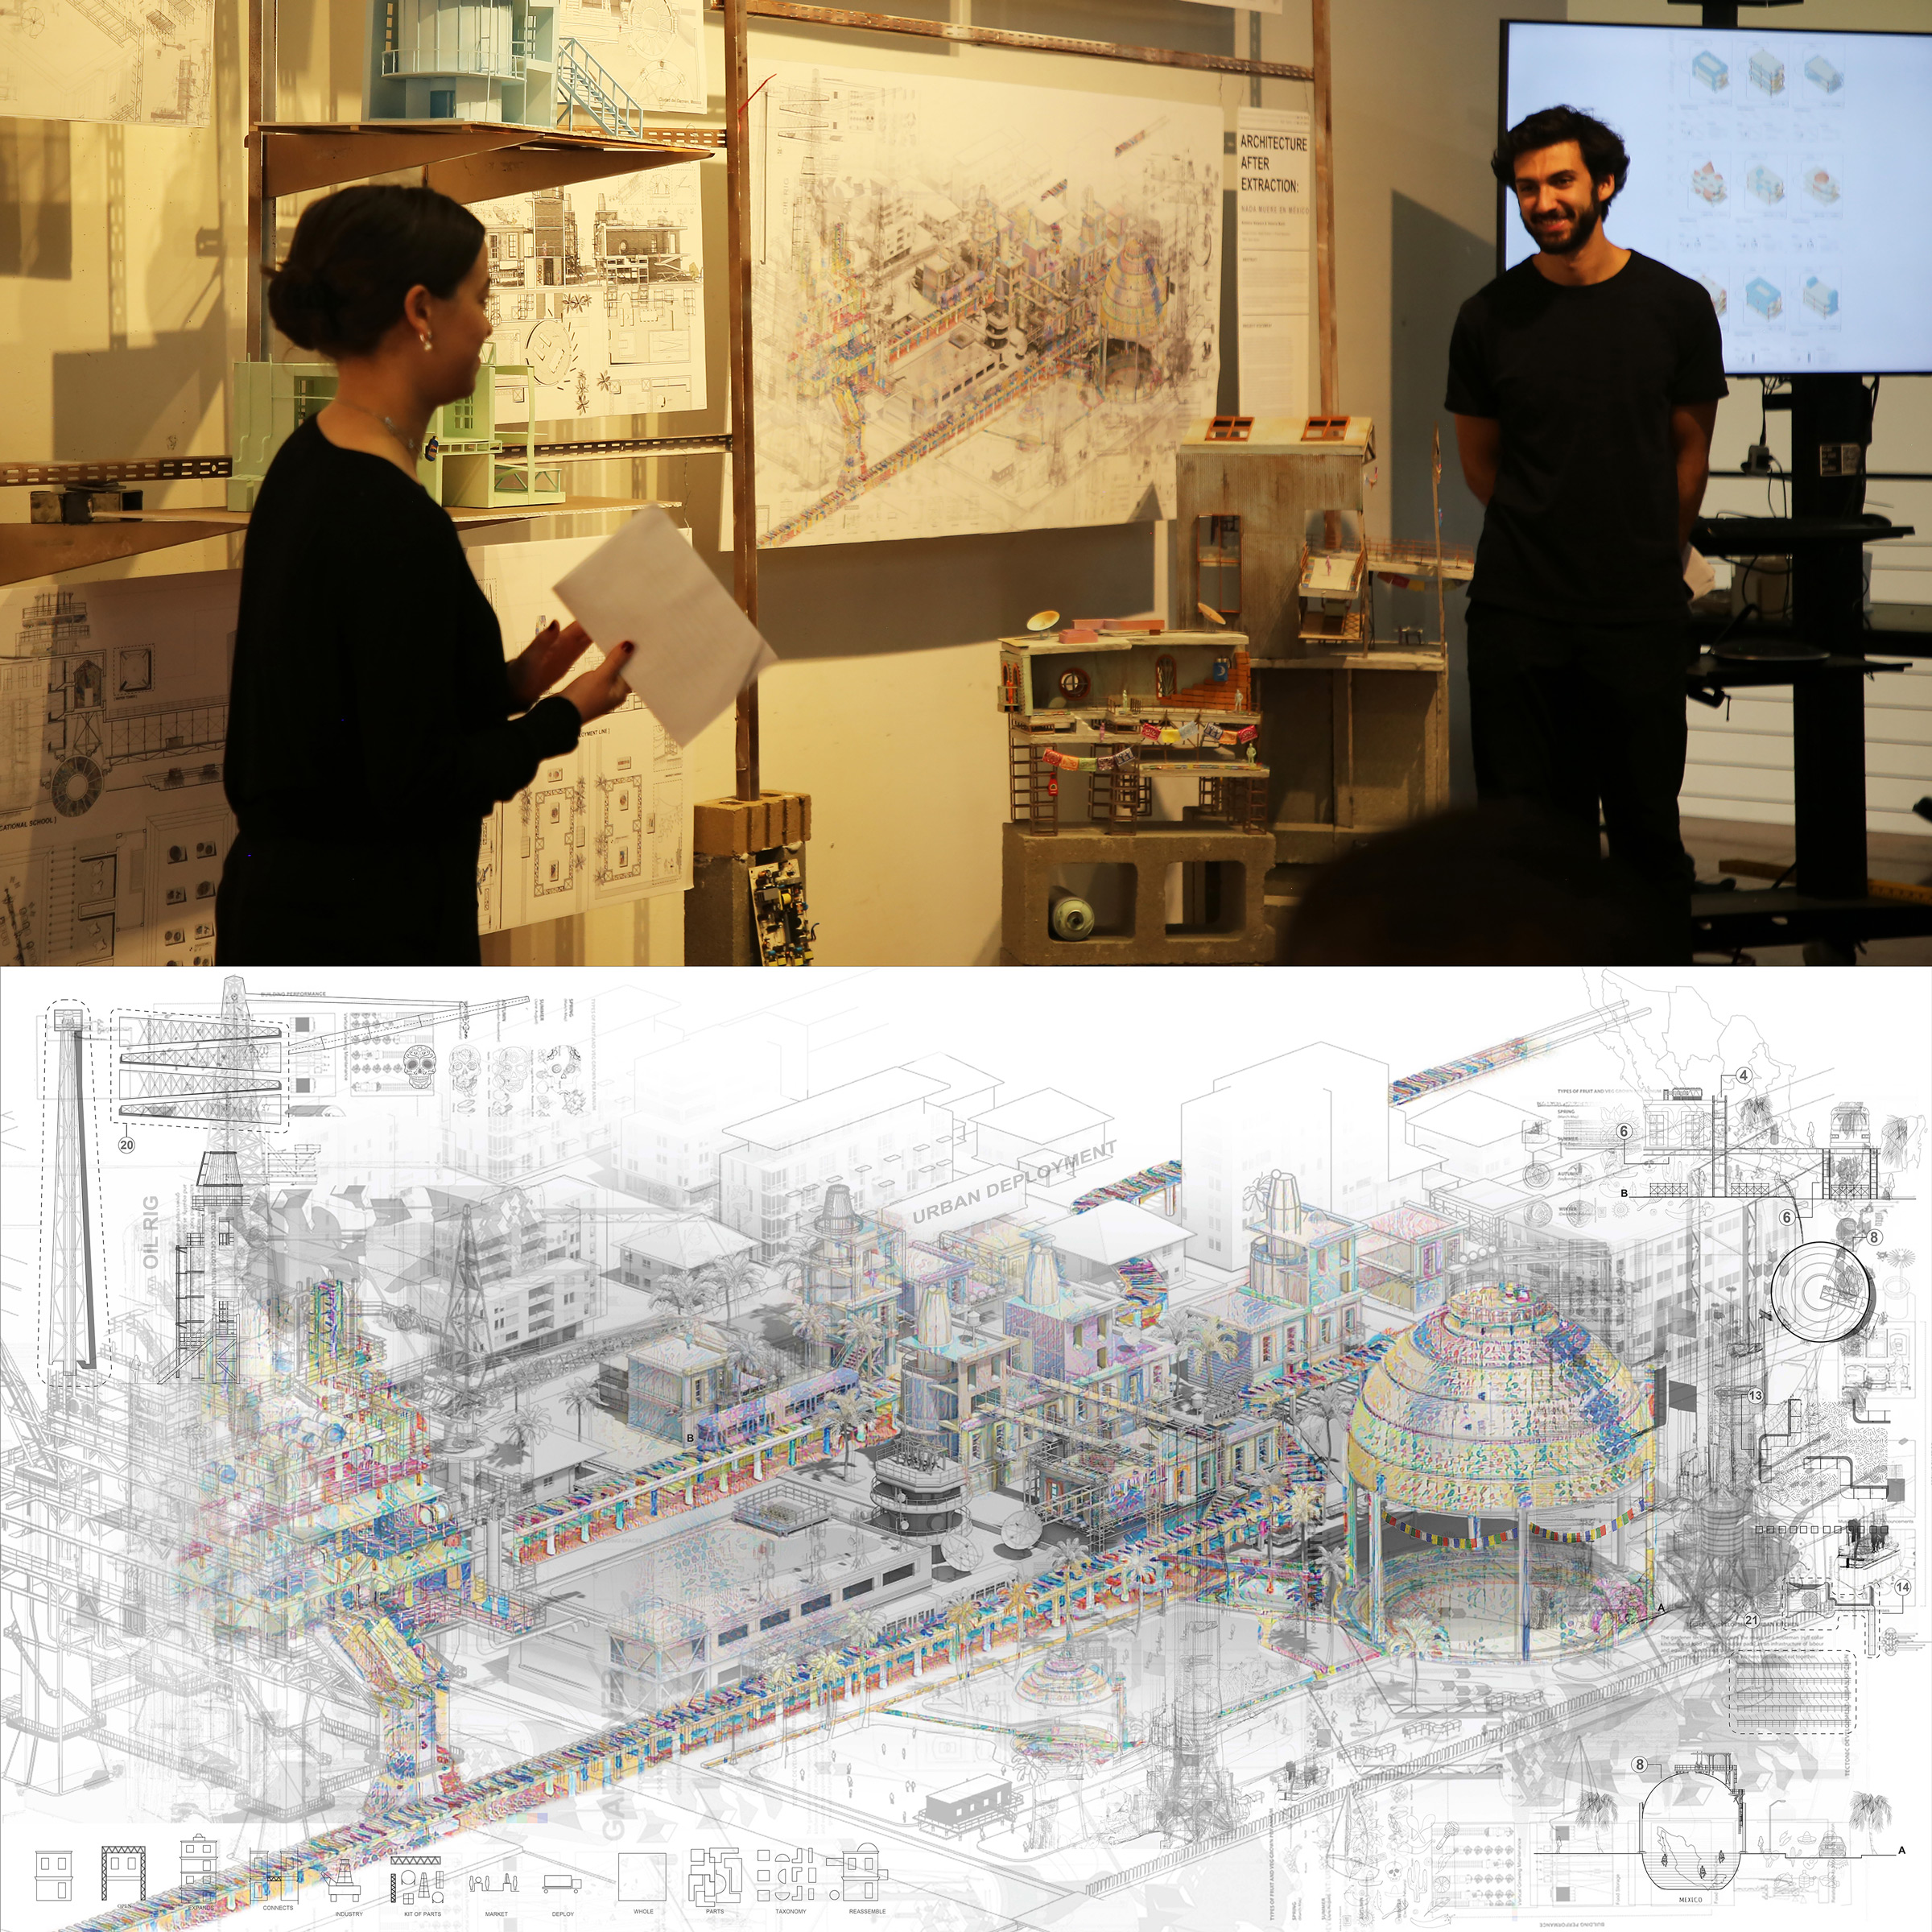 Two people stand on either side of architectural renderings and models. They are conversing with each other. Below the photograph is one of the renderings seen on the wall. It shows a complex structure of homes, walkways, trams, and public spaces.